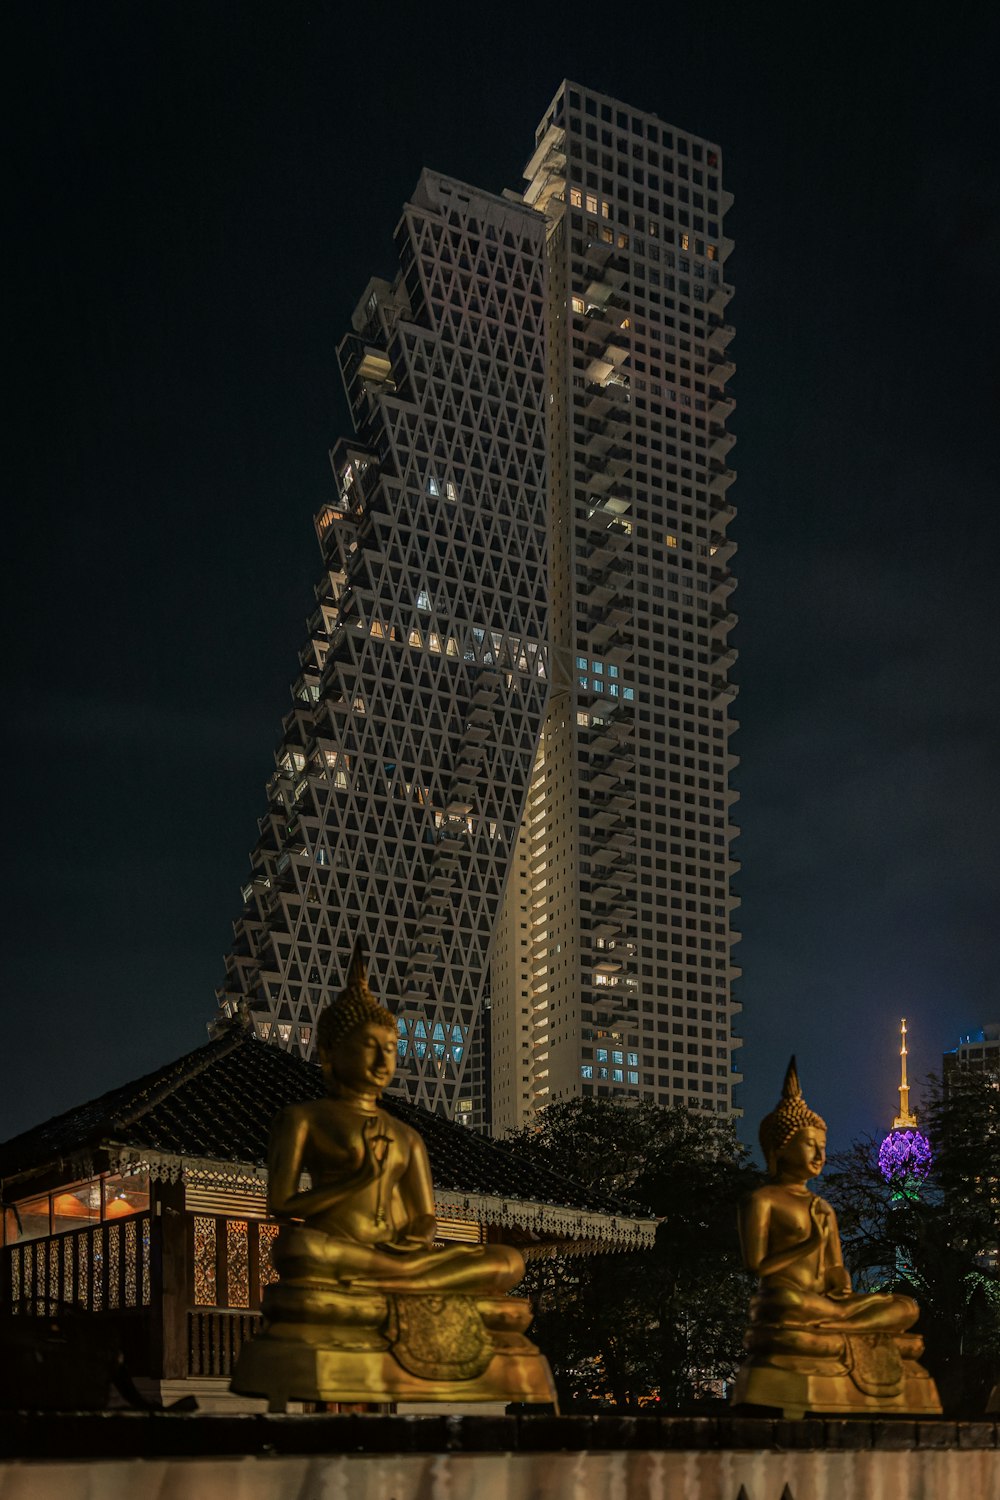 a very tall building with some statues in front of it